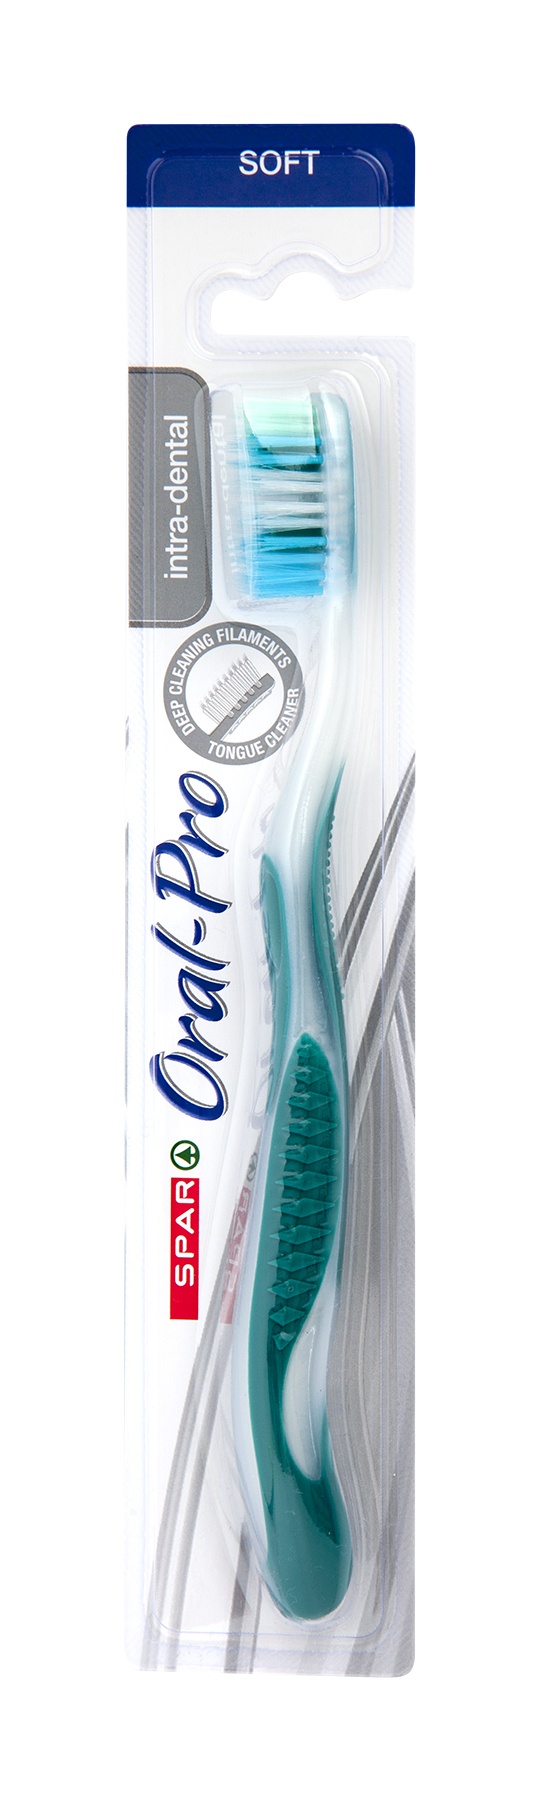 oral pro toothbrush intra dental - soft